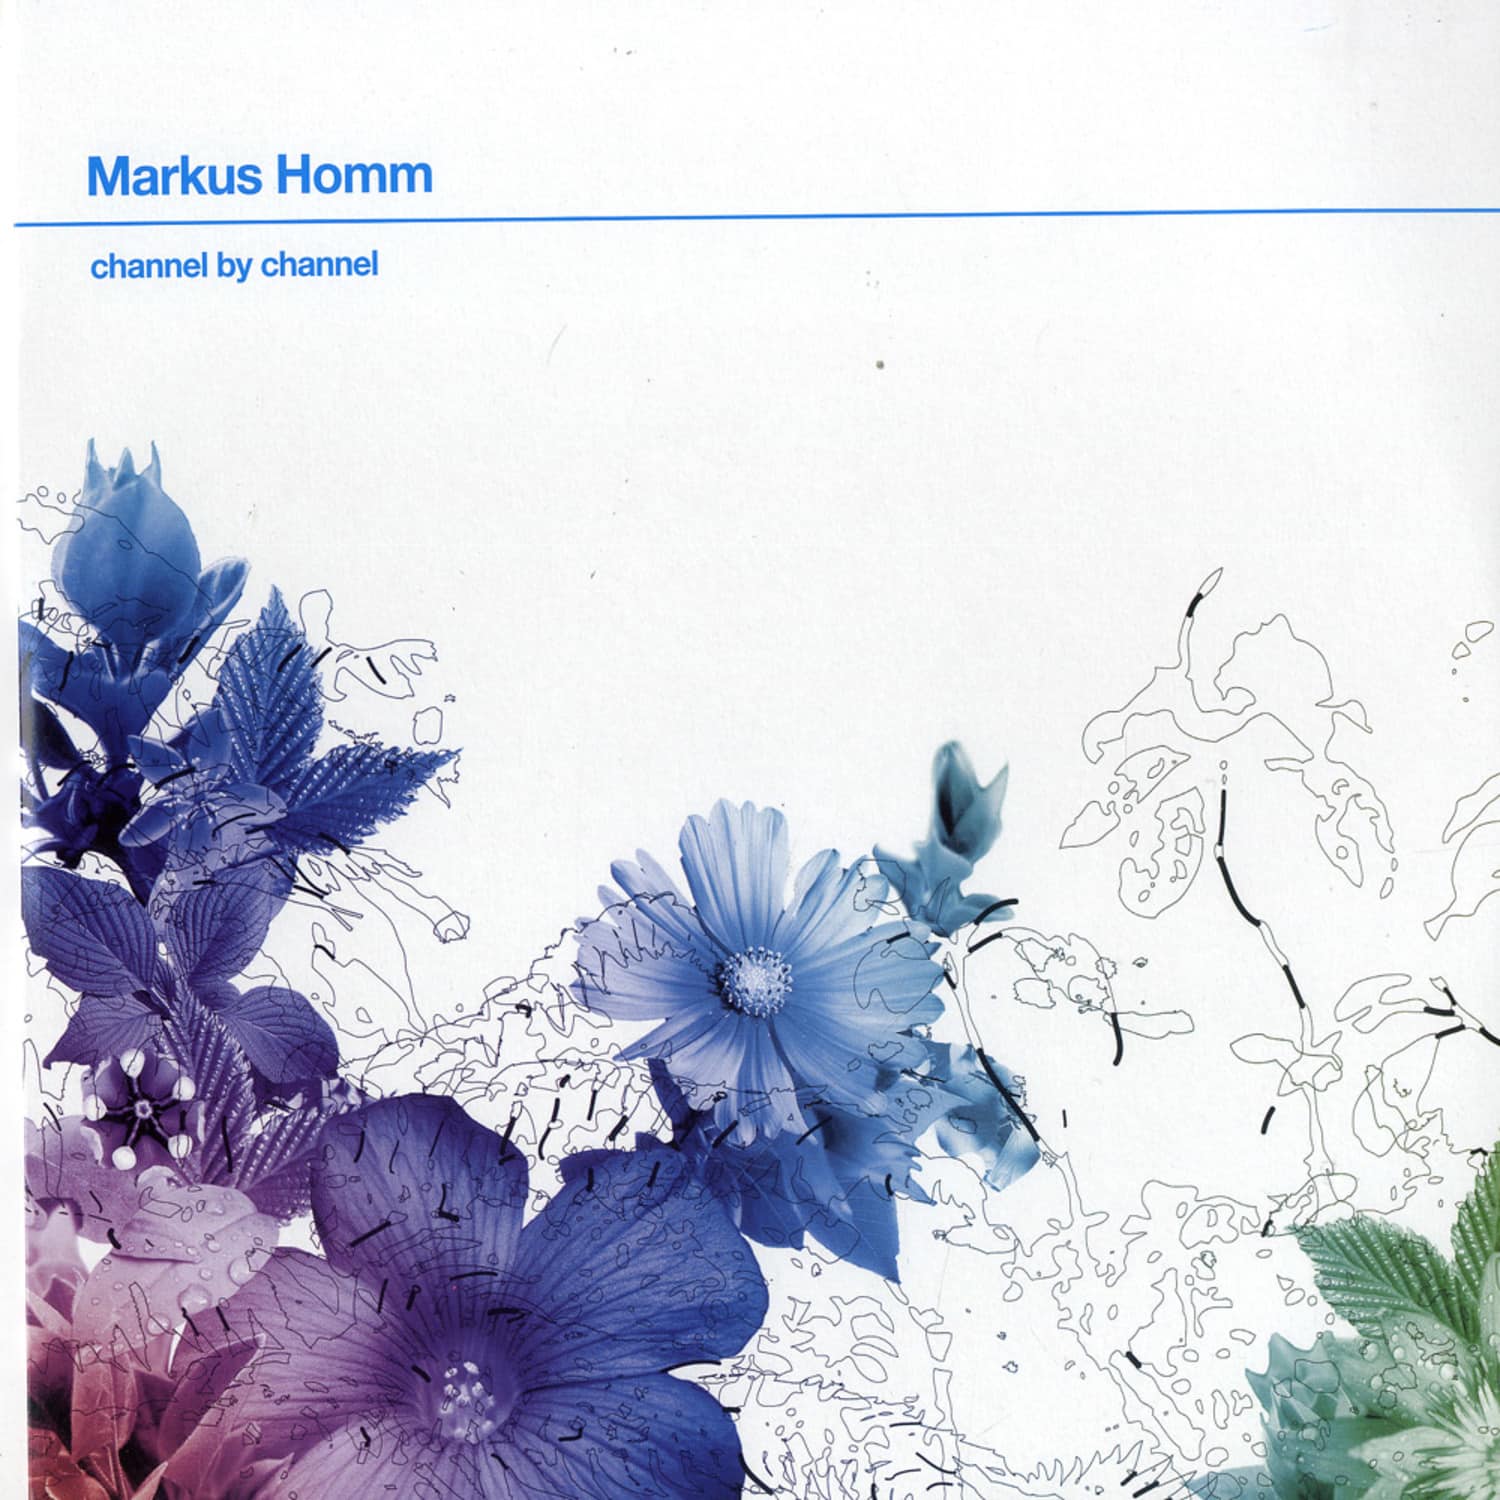 Markus Homm - CHANNEL BY CHANNEL